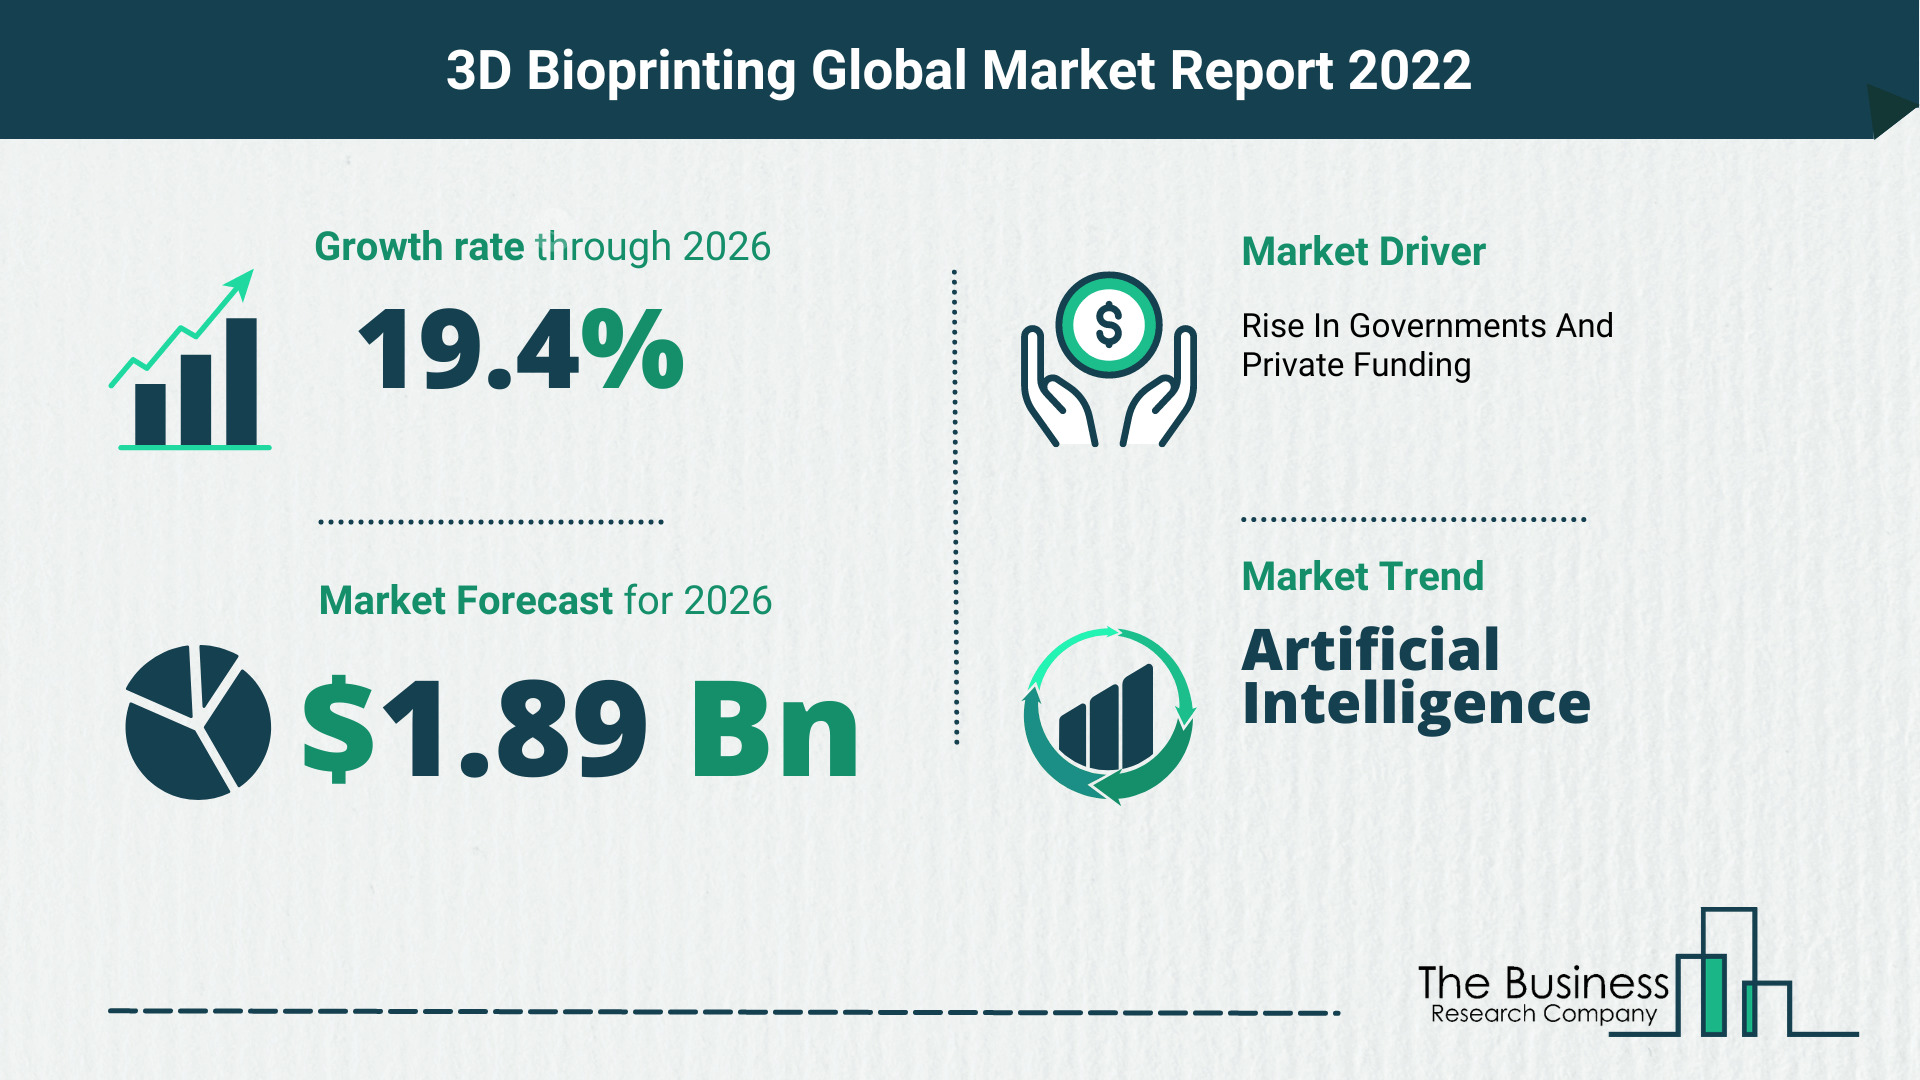 How Will The 3D Bioprinting Market Grow In 2022?